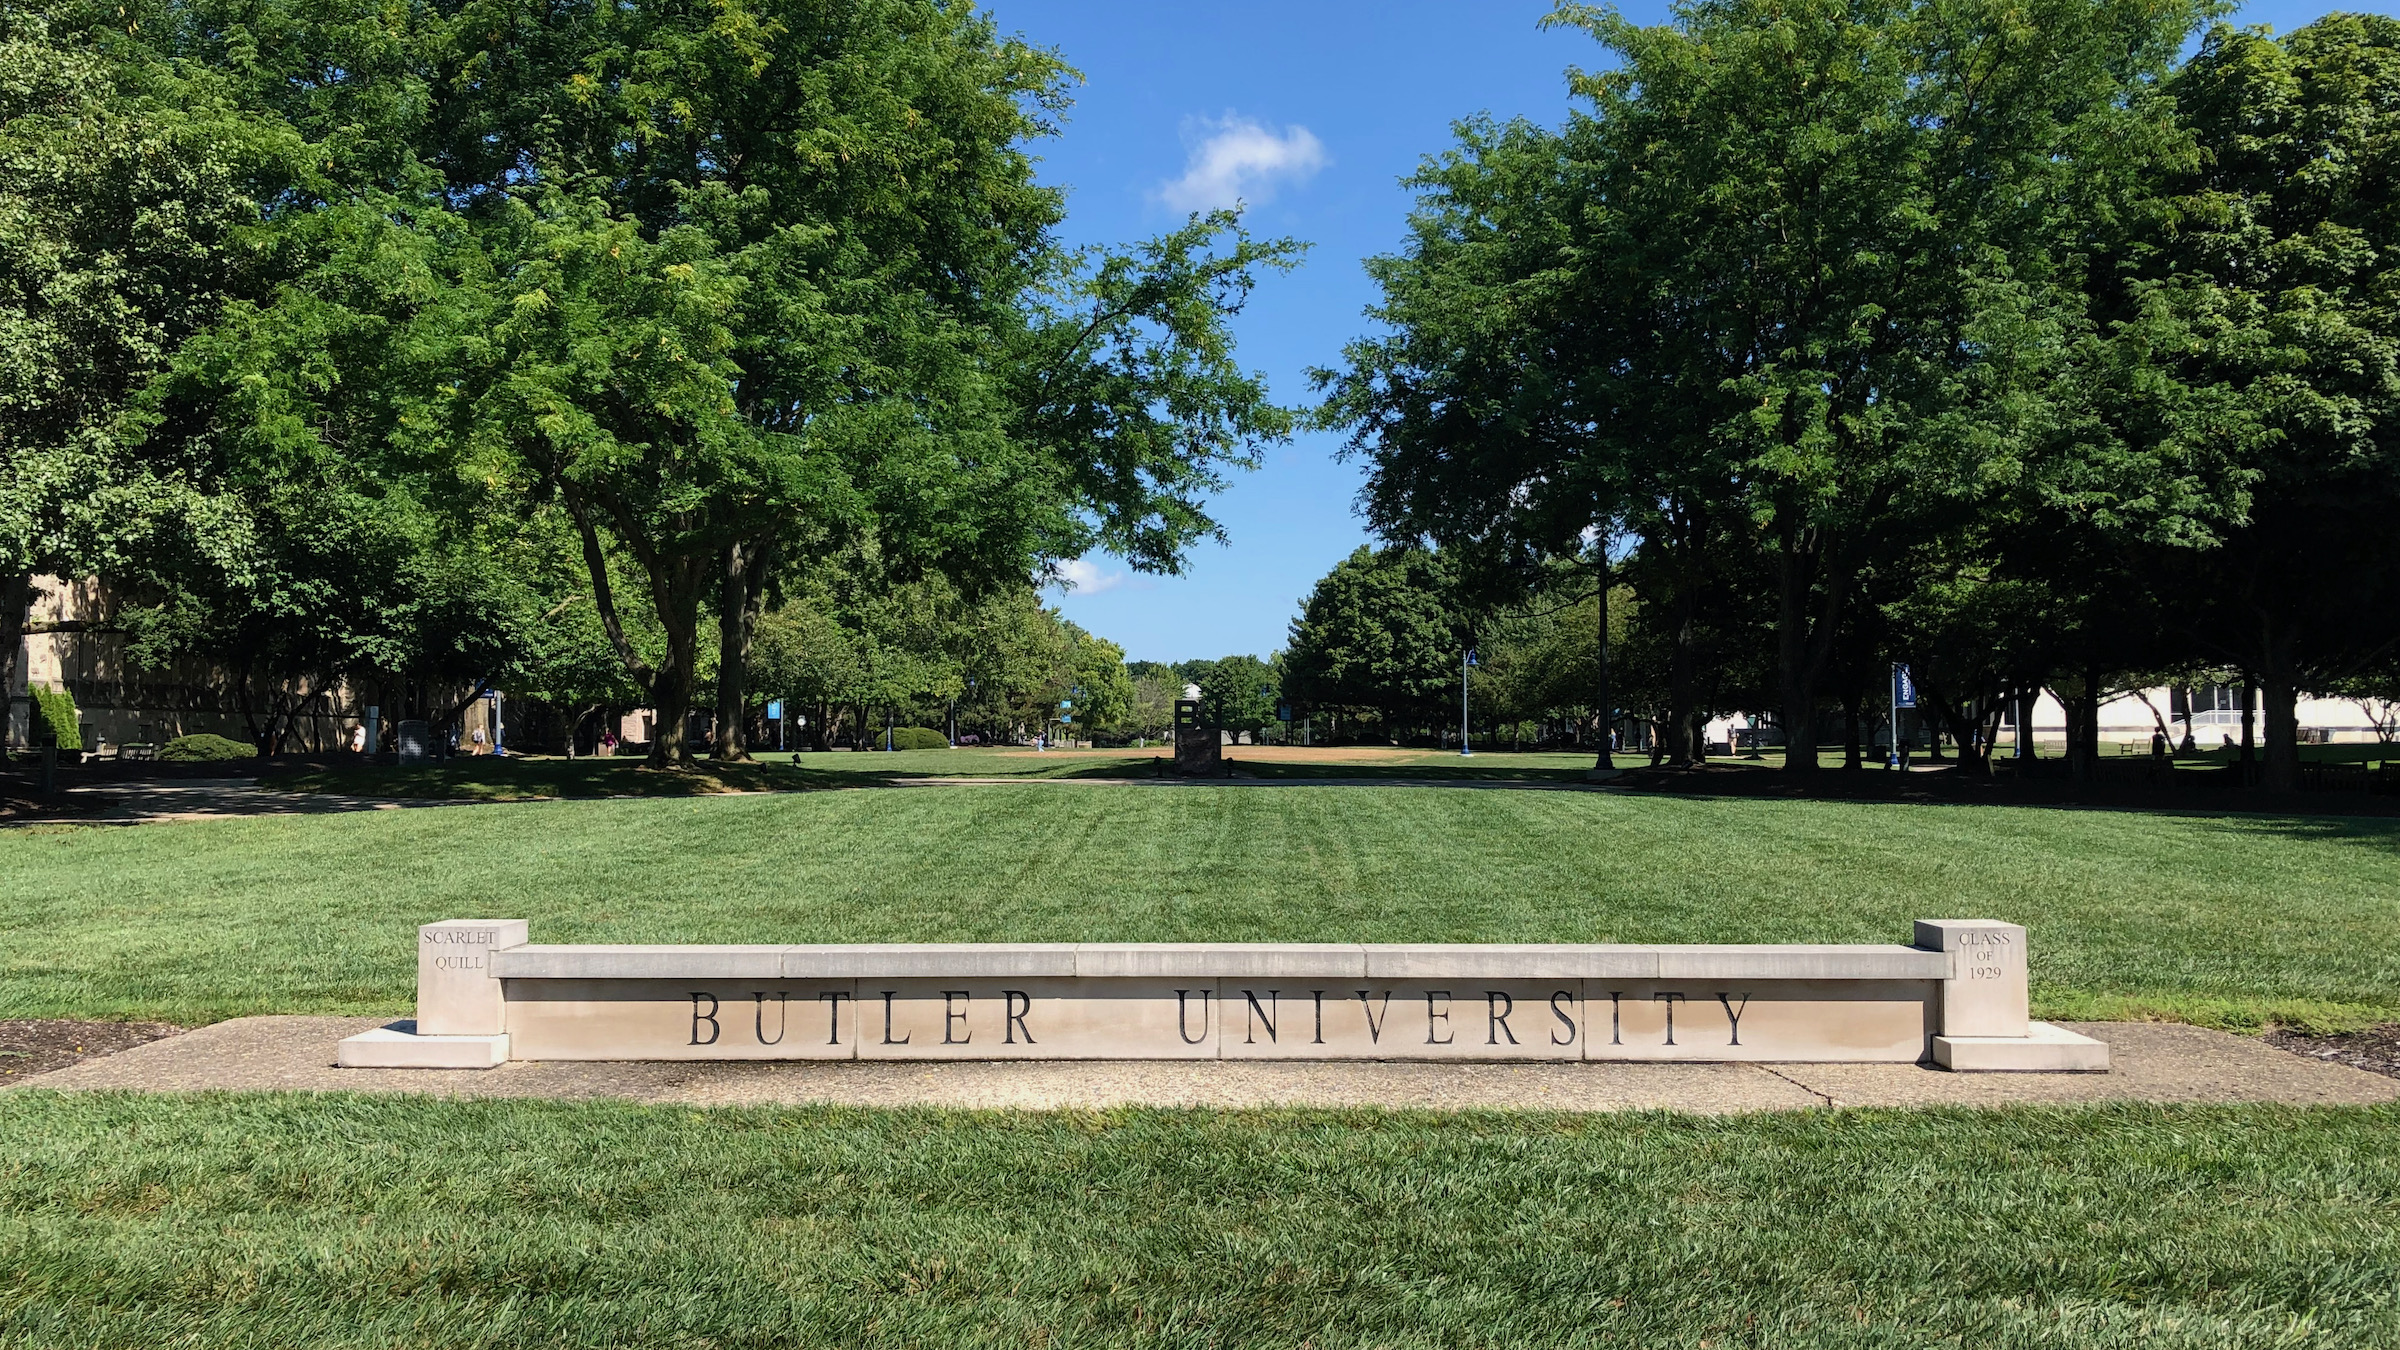 butler-university-ranks-1-in-us-news-list-of-best-midwest-universities-for-fourth-consecutive